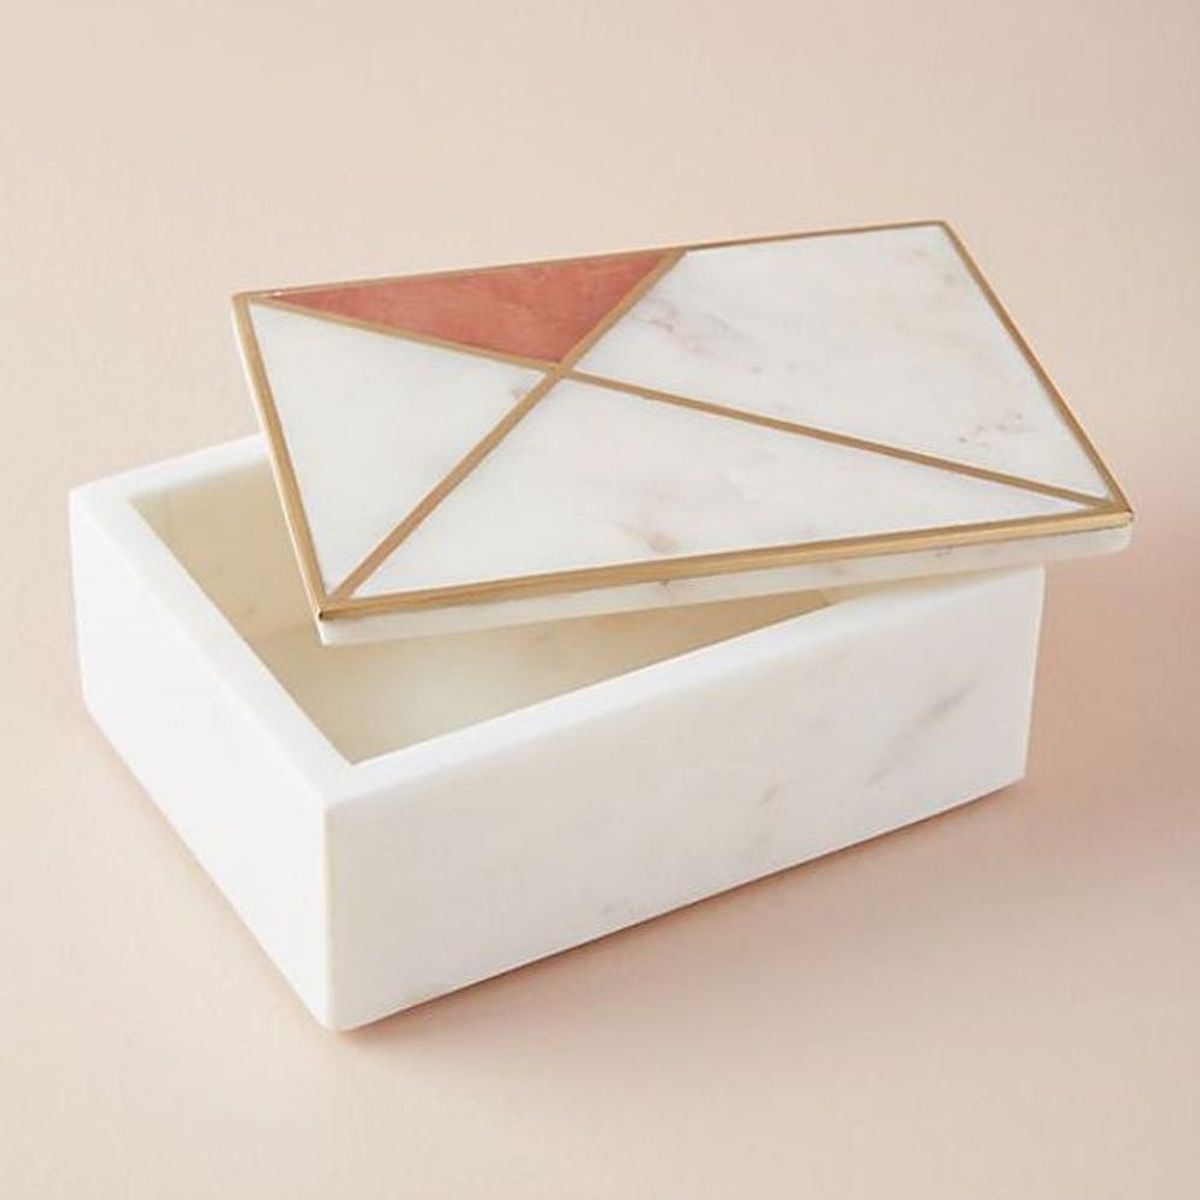 13 Jewelry Boxes and Organizers to Make Your Accessories Shine